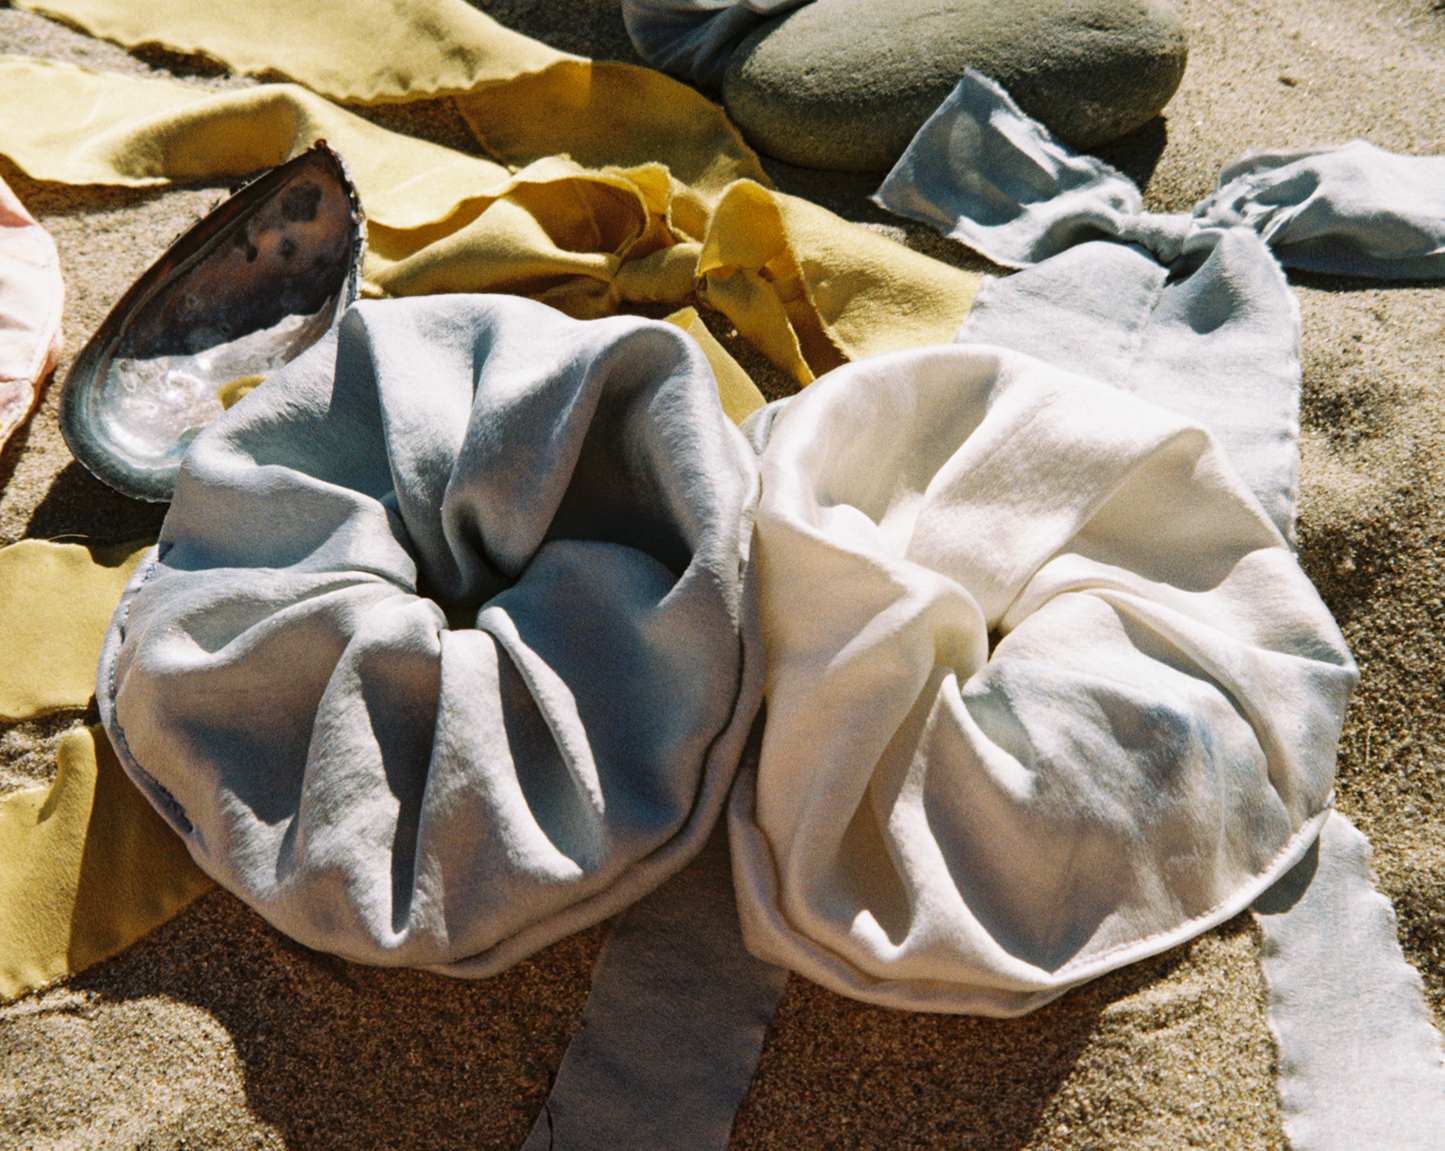 Two silk scrunchies side by side on the beach